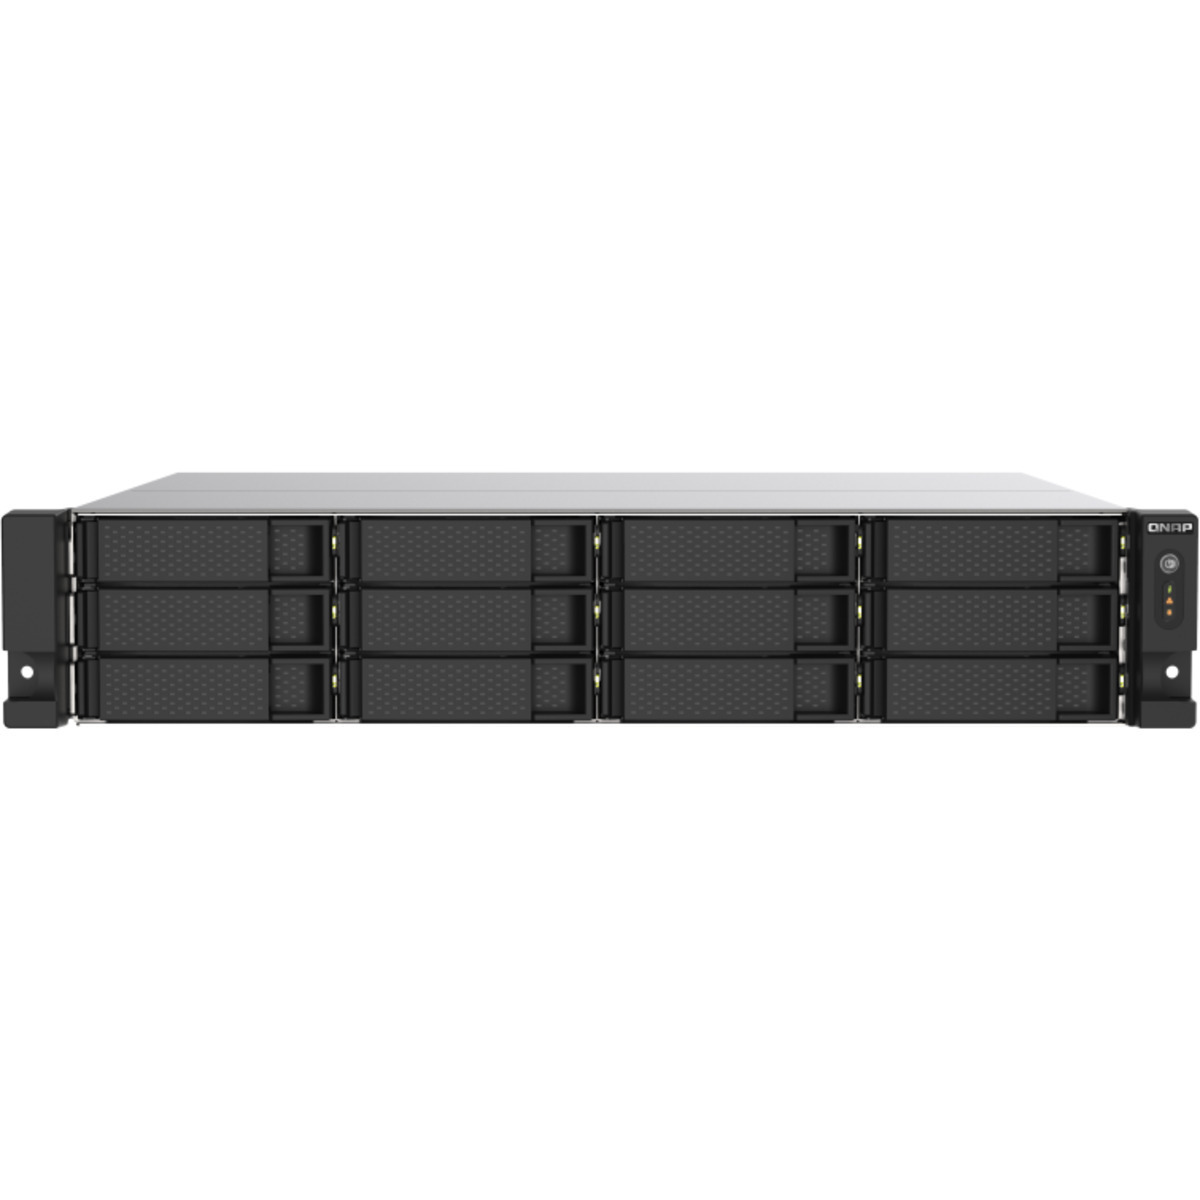 QNAP TS-1273AU-RP 24tb 12-Bay RackMount Multimedia / Power User / Business NAS - Network Attached Storage Device 12x2tb Samsung 870 EVO MZ-77E2T0BAM 2.5 560/530MB/s SATA 6Gb/s SSD CONSUMER Class Drives Installed - Burn-In Tested - FREE RAM UPGRADE TS-1273AU-RP